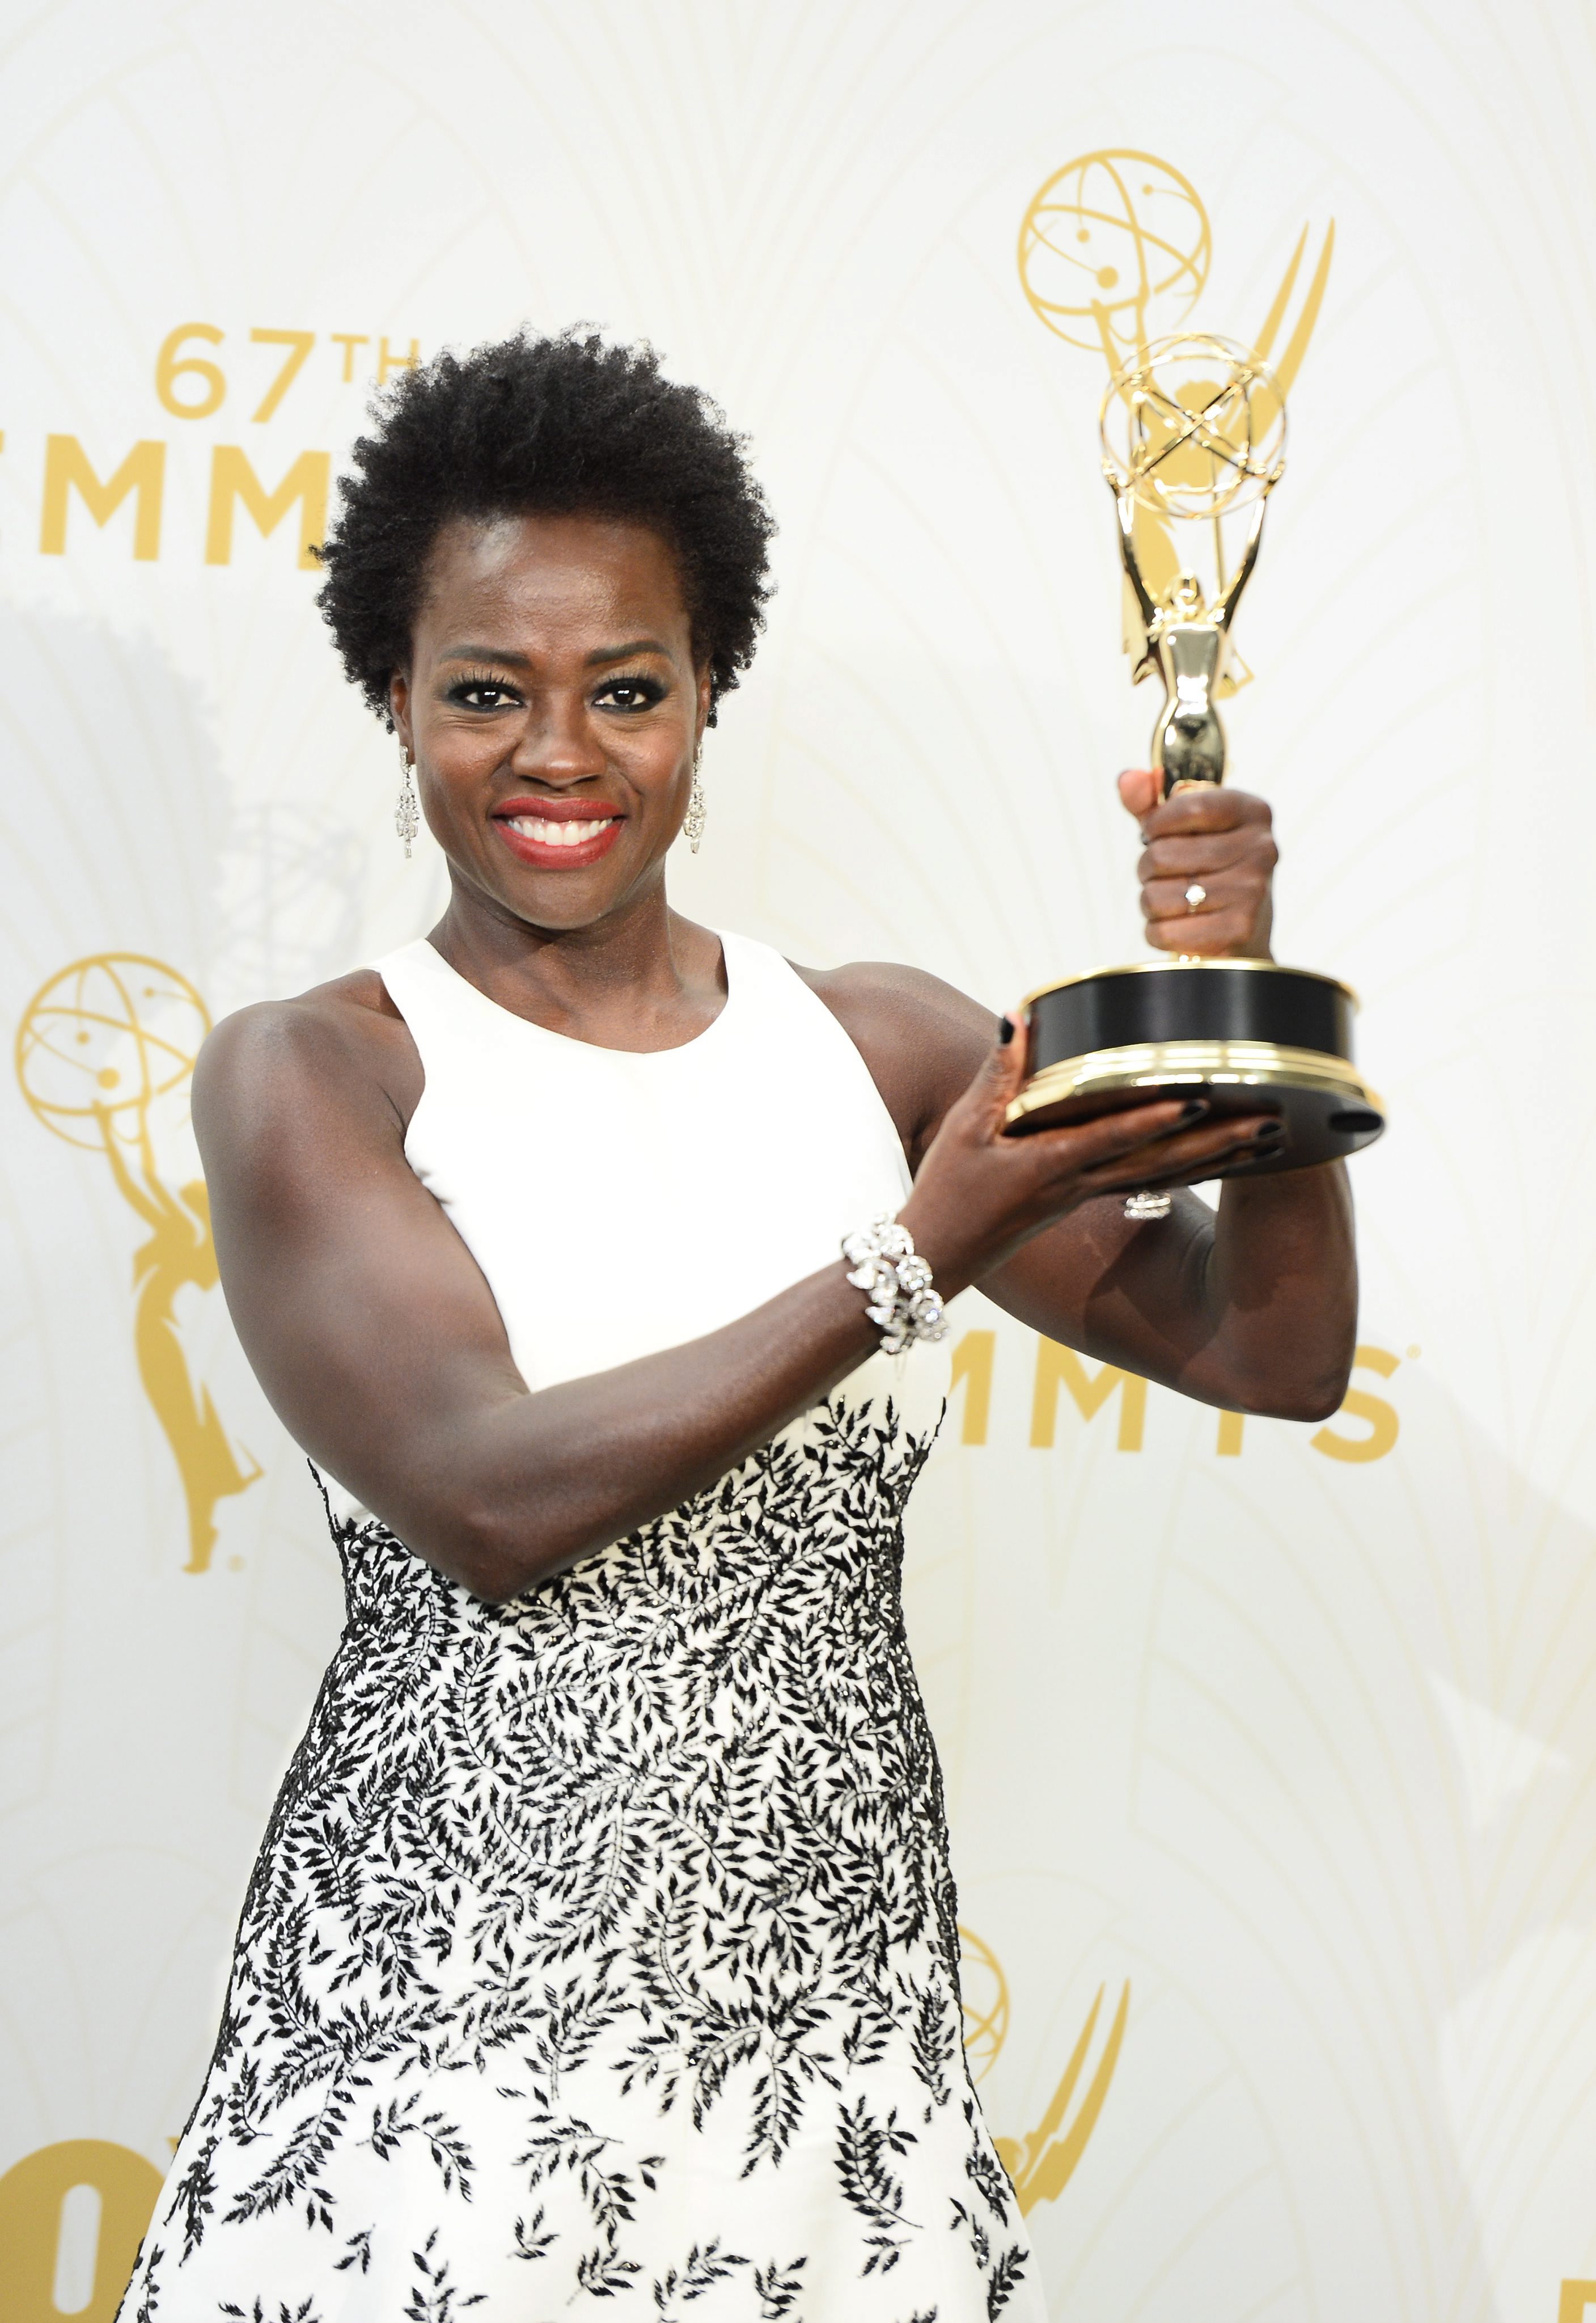 <p>Viola Davis made history during the 2015 Emmy Awards when she became the first Black woman to win the prize for outstanding lead actress in a drama series. She took home the Emmy for her performance on "How to Get Away with Murder."</p>